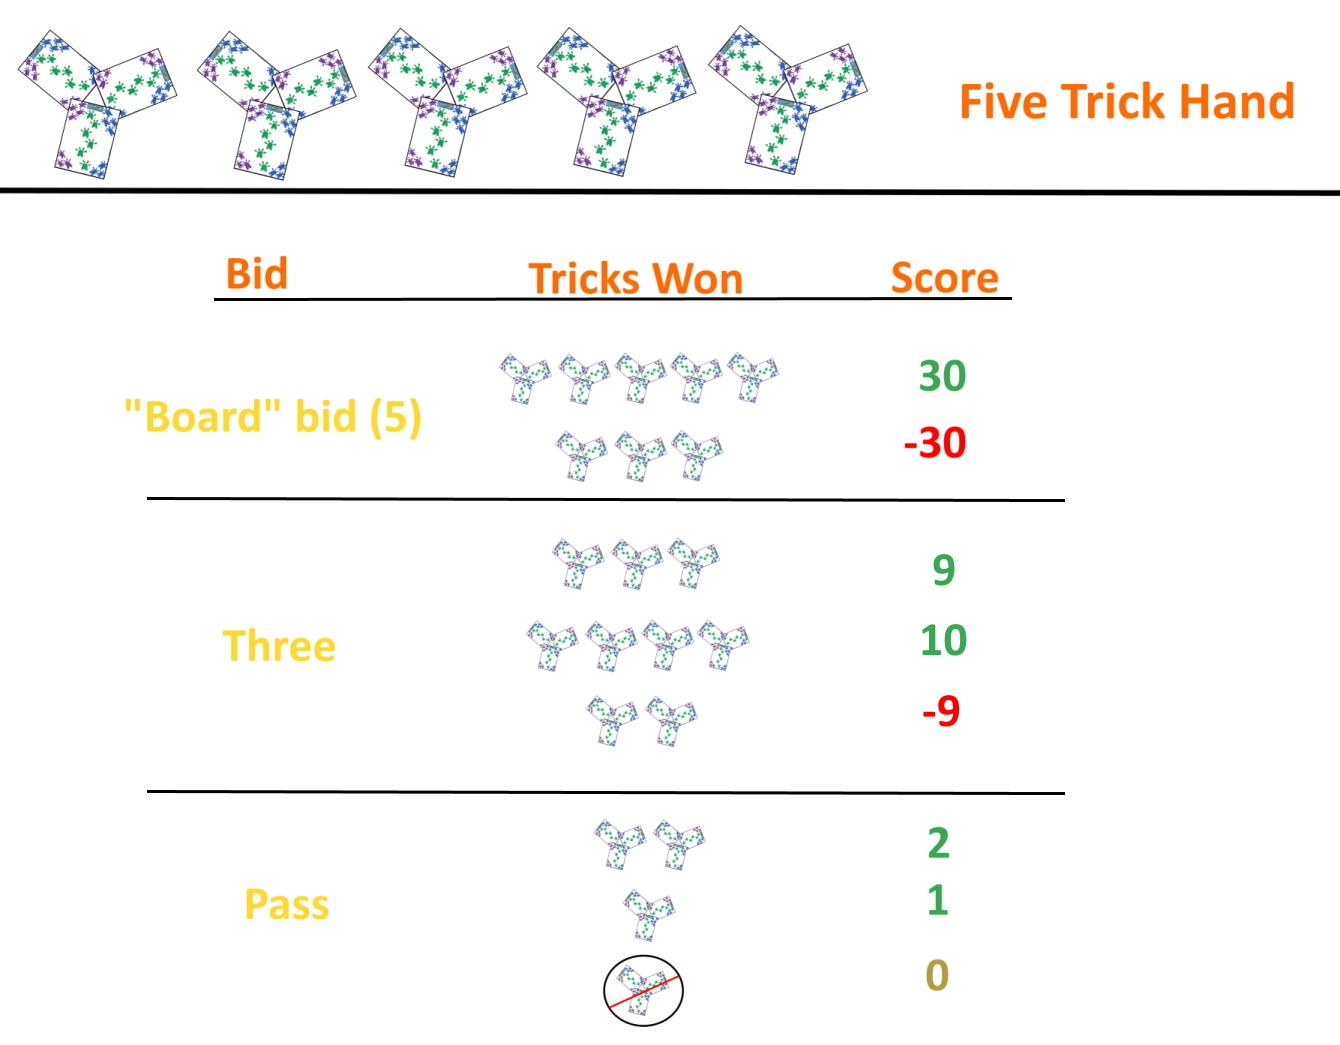 Example scoring for bids in five card hand